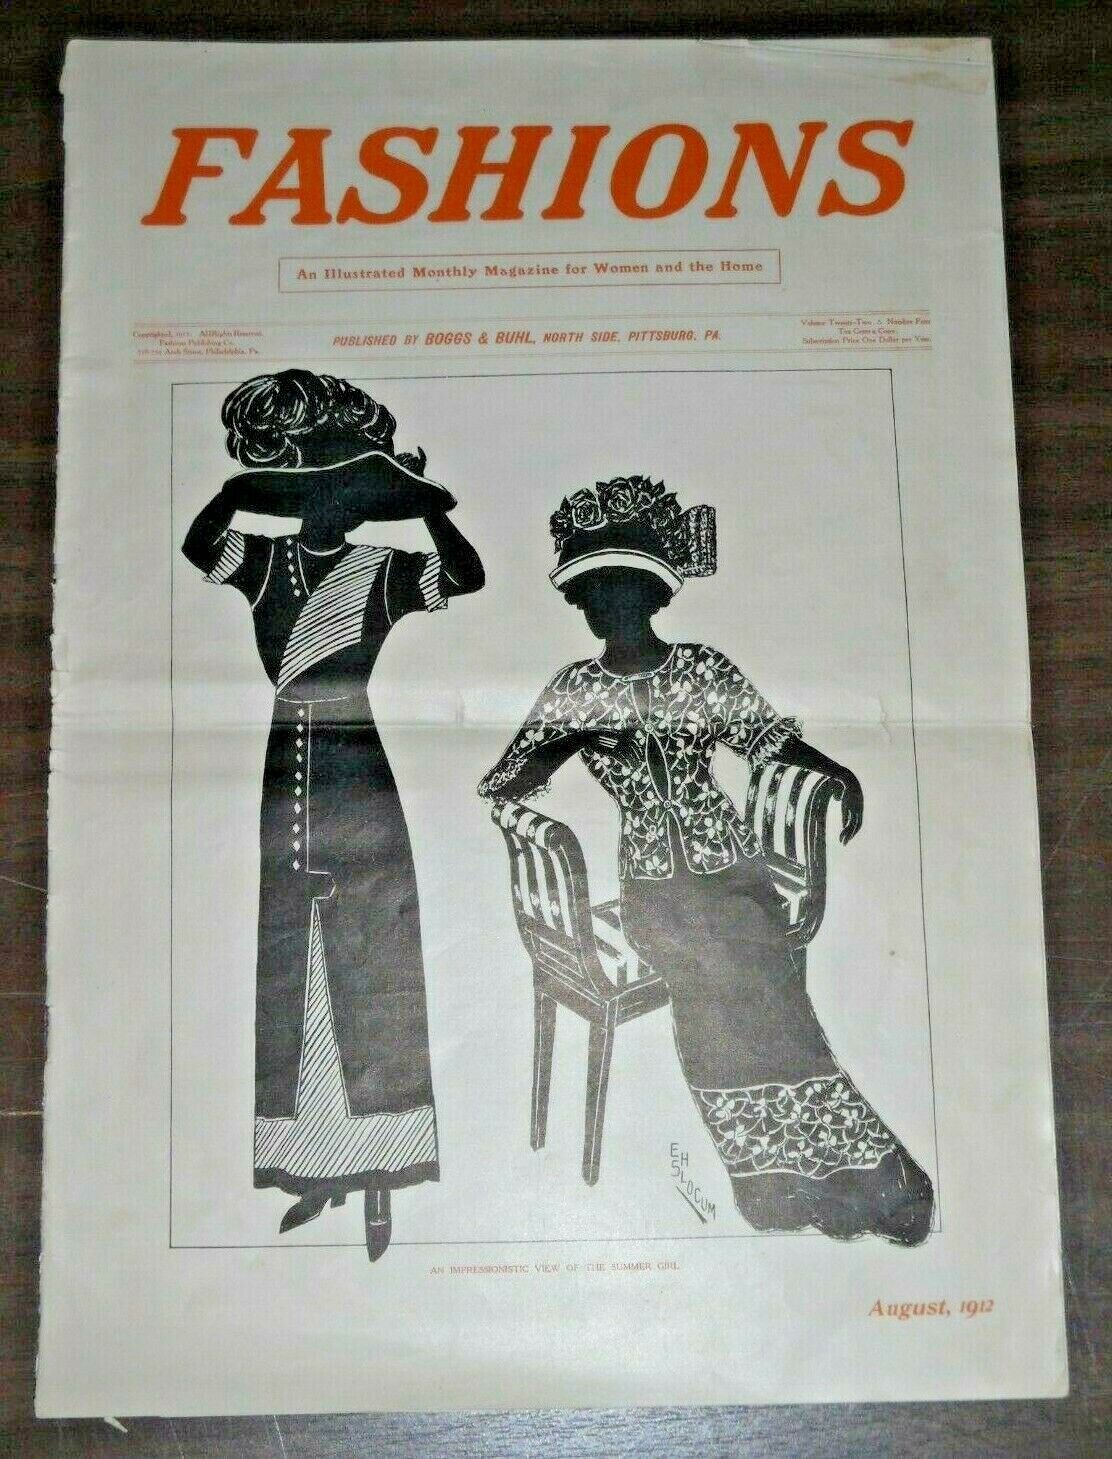 Antique FASHIONS Magazine - Boggs & Buhl Pittsburgh PA - August 1912